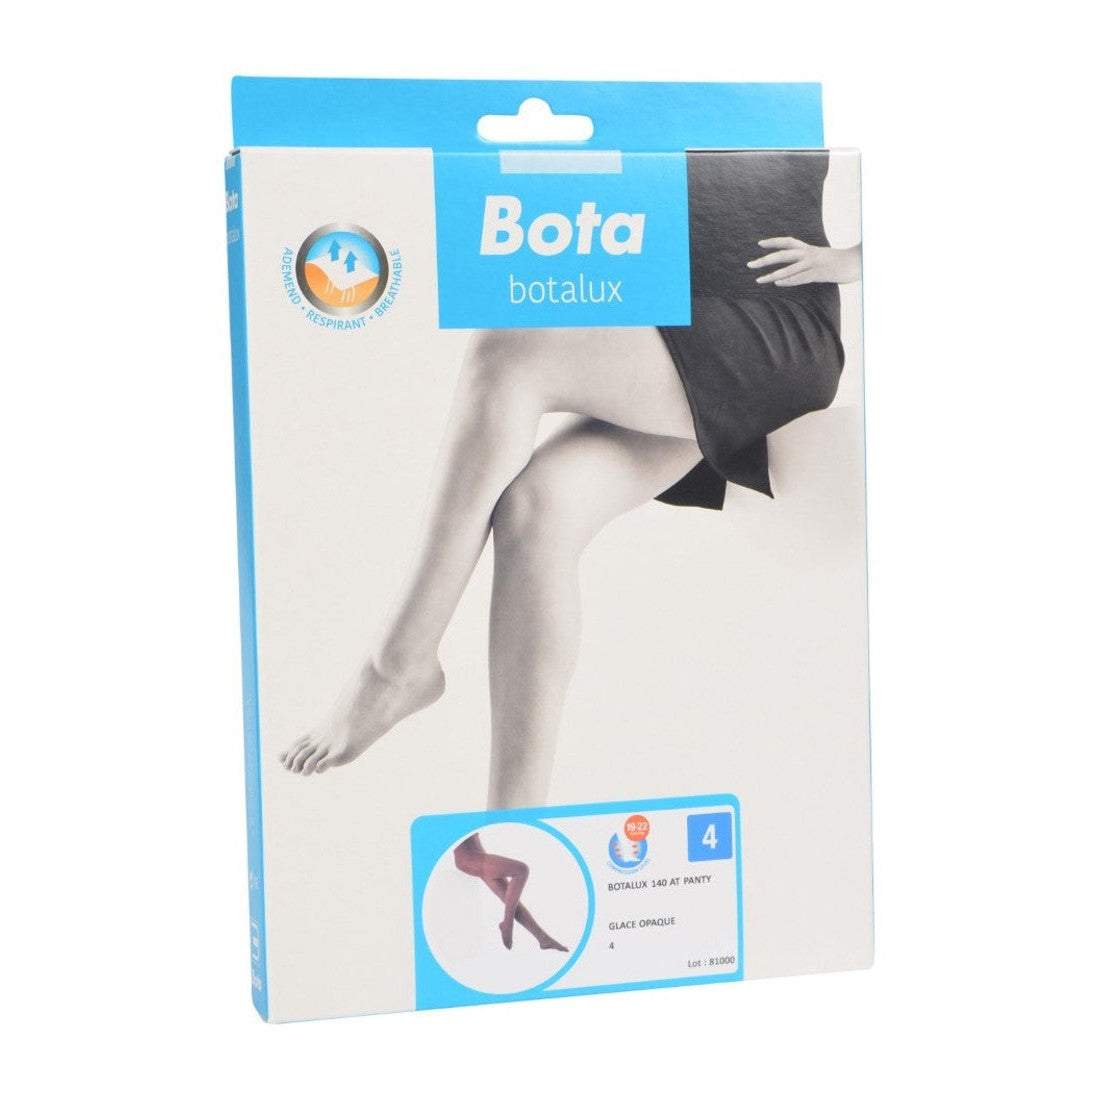 Botalux 140 support tights at glace opaque